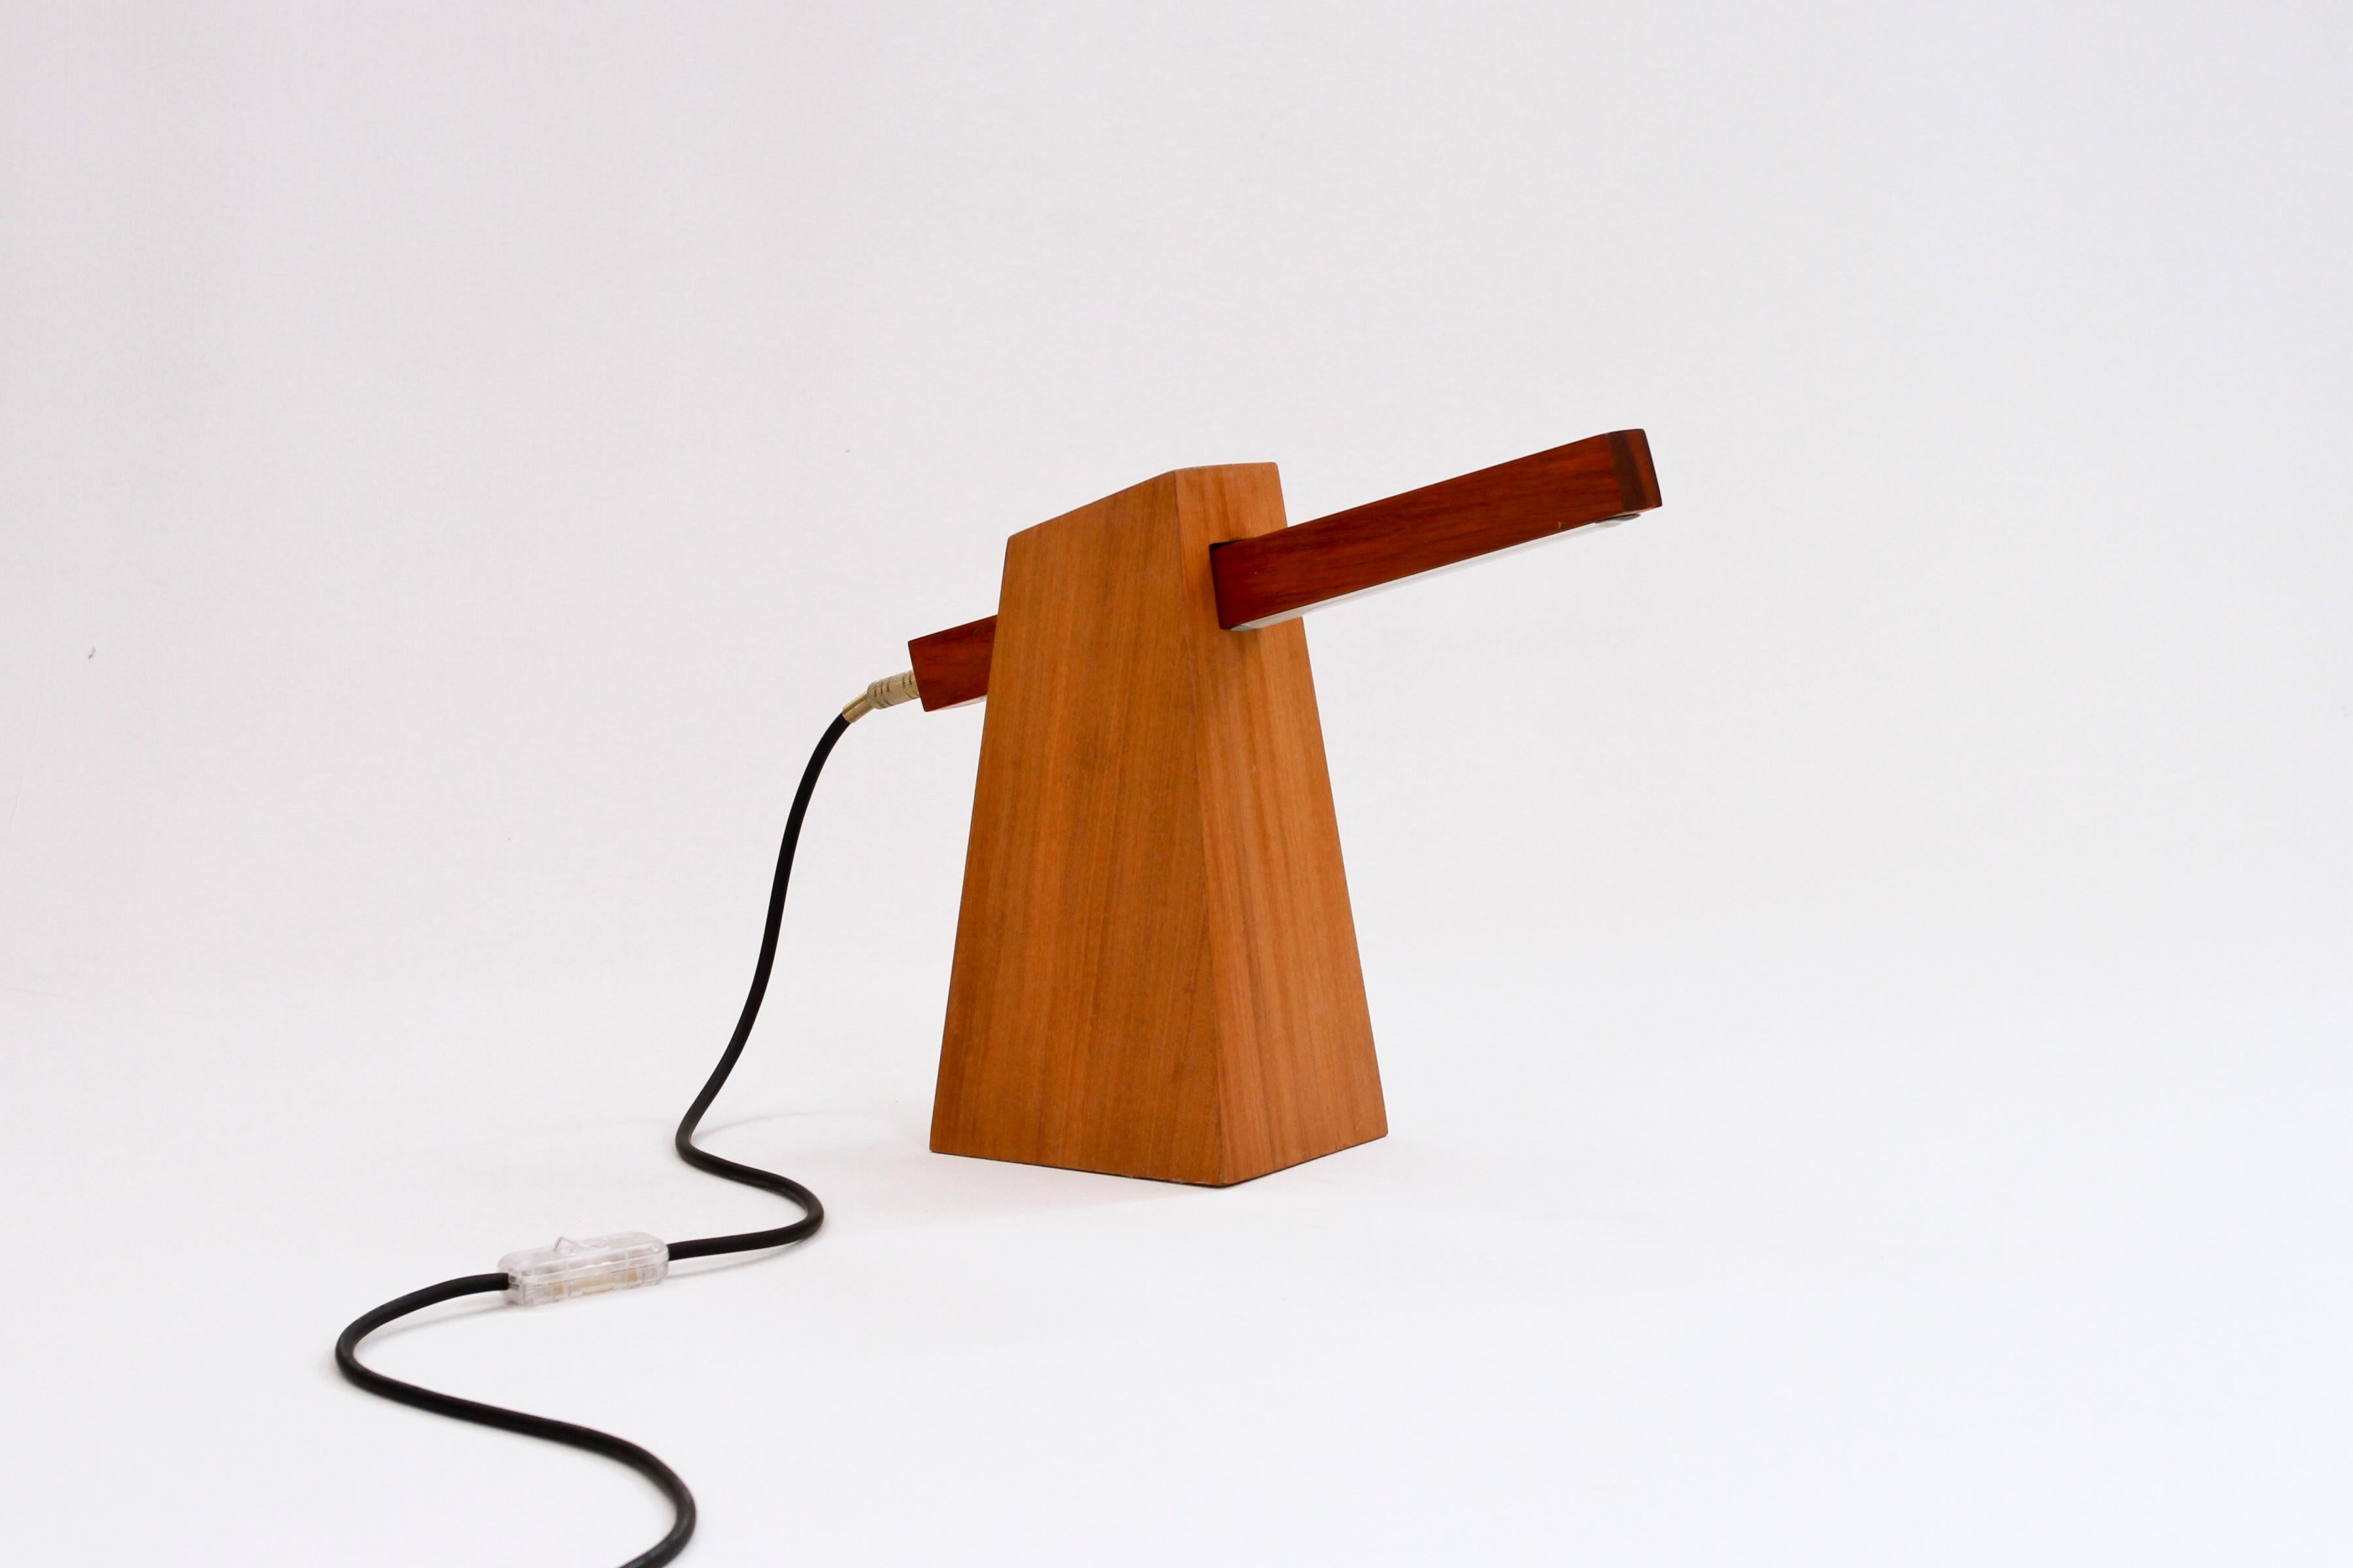 Table lamp in wood and LED.
Lamp base is made in reclaimed Peroba wood and light stick is made in Muirapiranga, a native Brazilian wood. 
Guitar plug controls on/off

Matraca lamp is an artisanal product designed and manufactured in Rio de